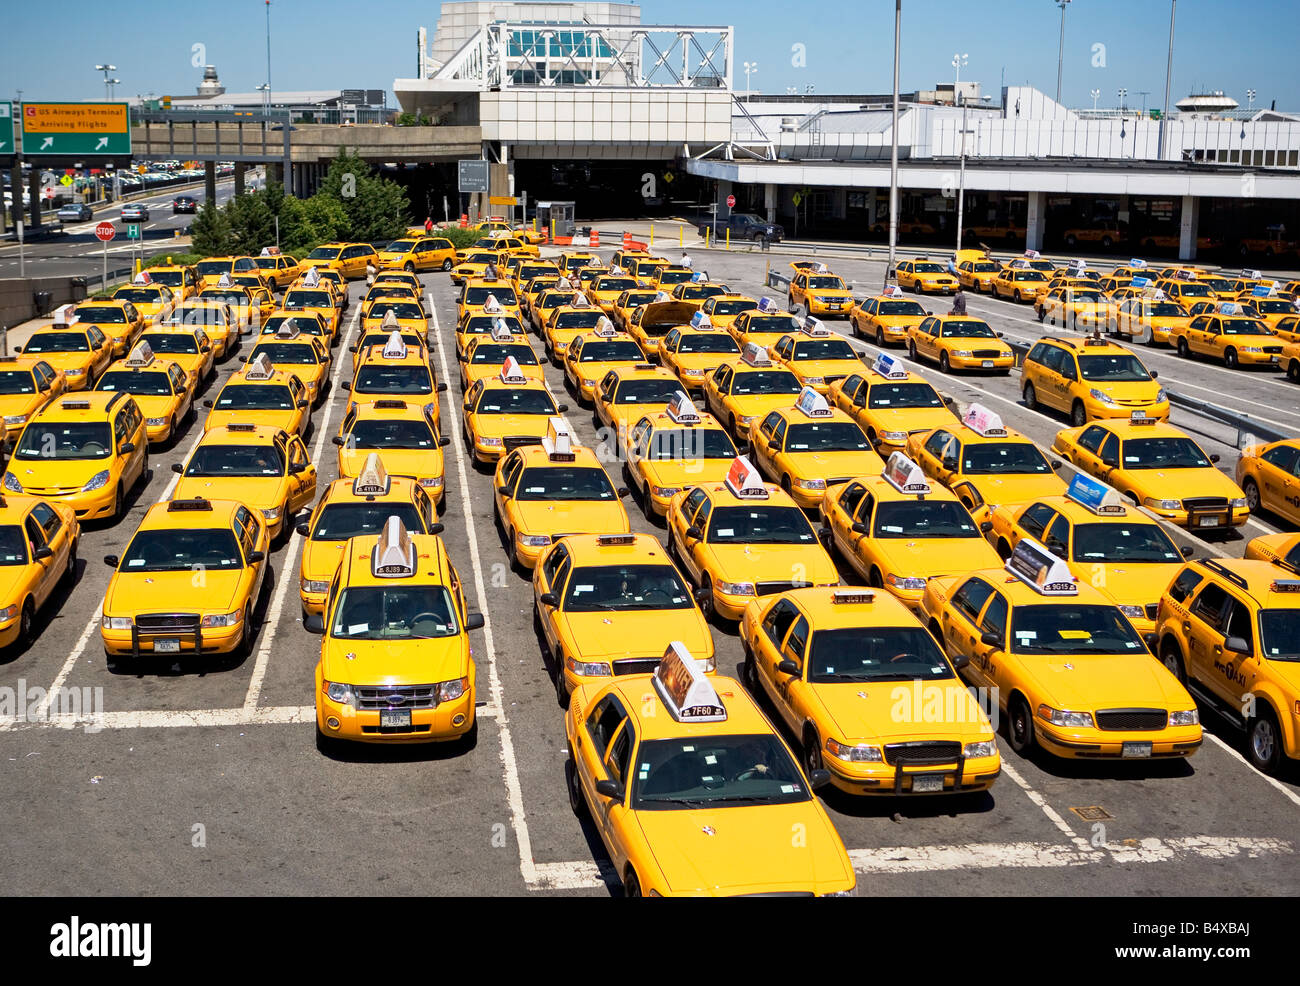 Taxis New York Queue High Resolution Stock Photography and Images - Alamy